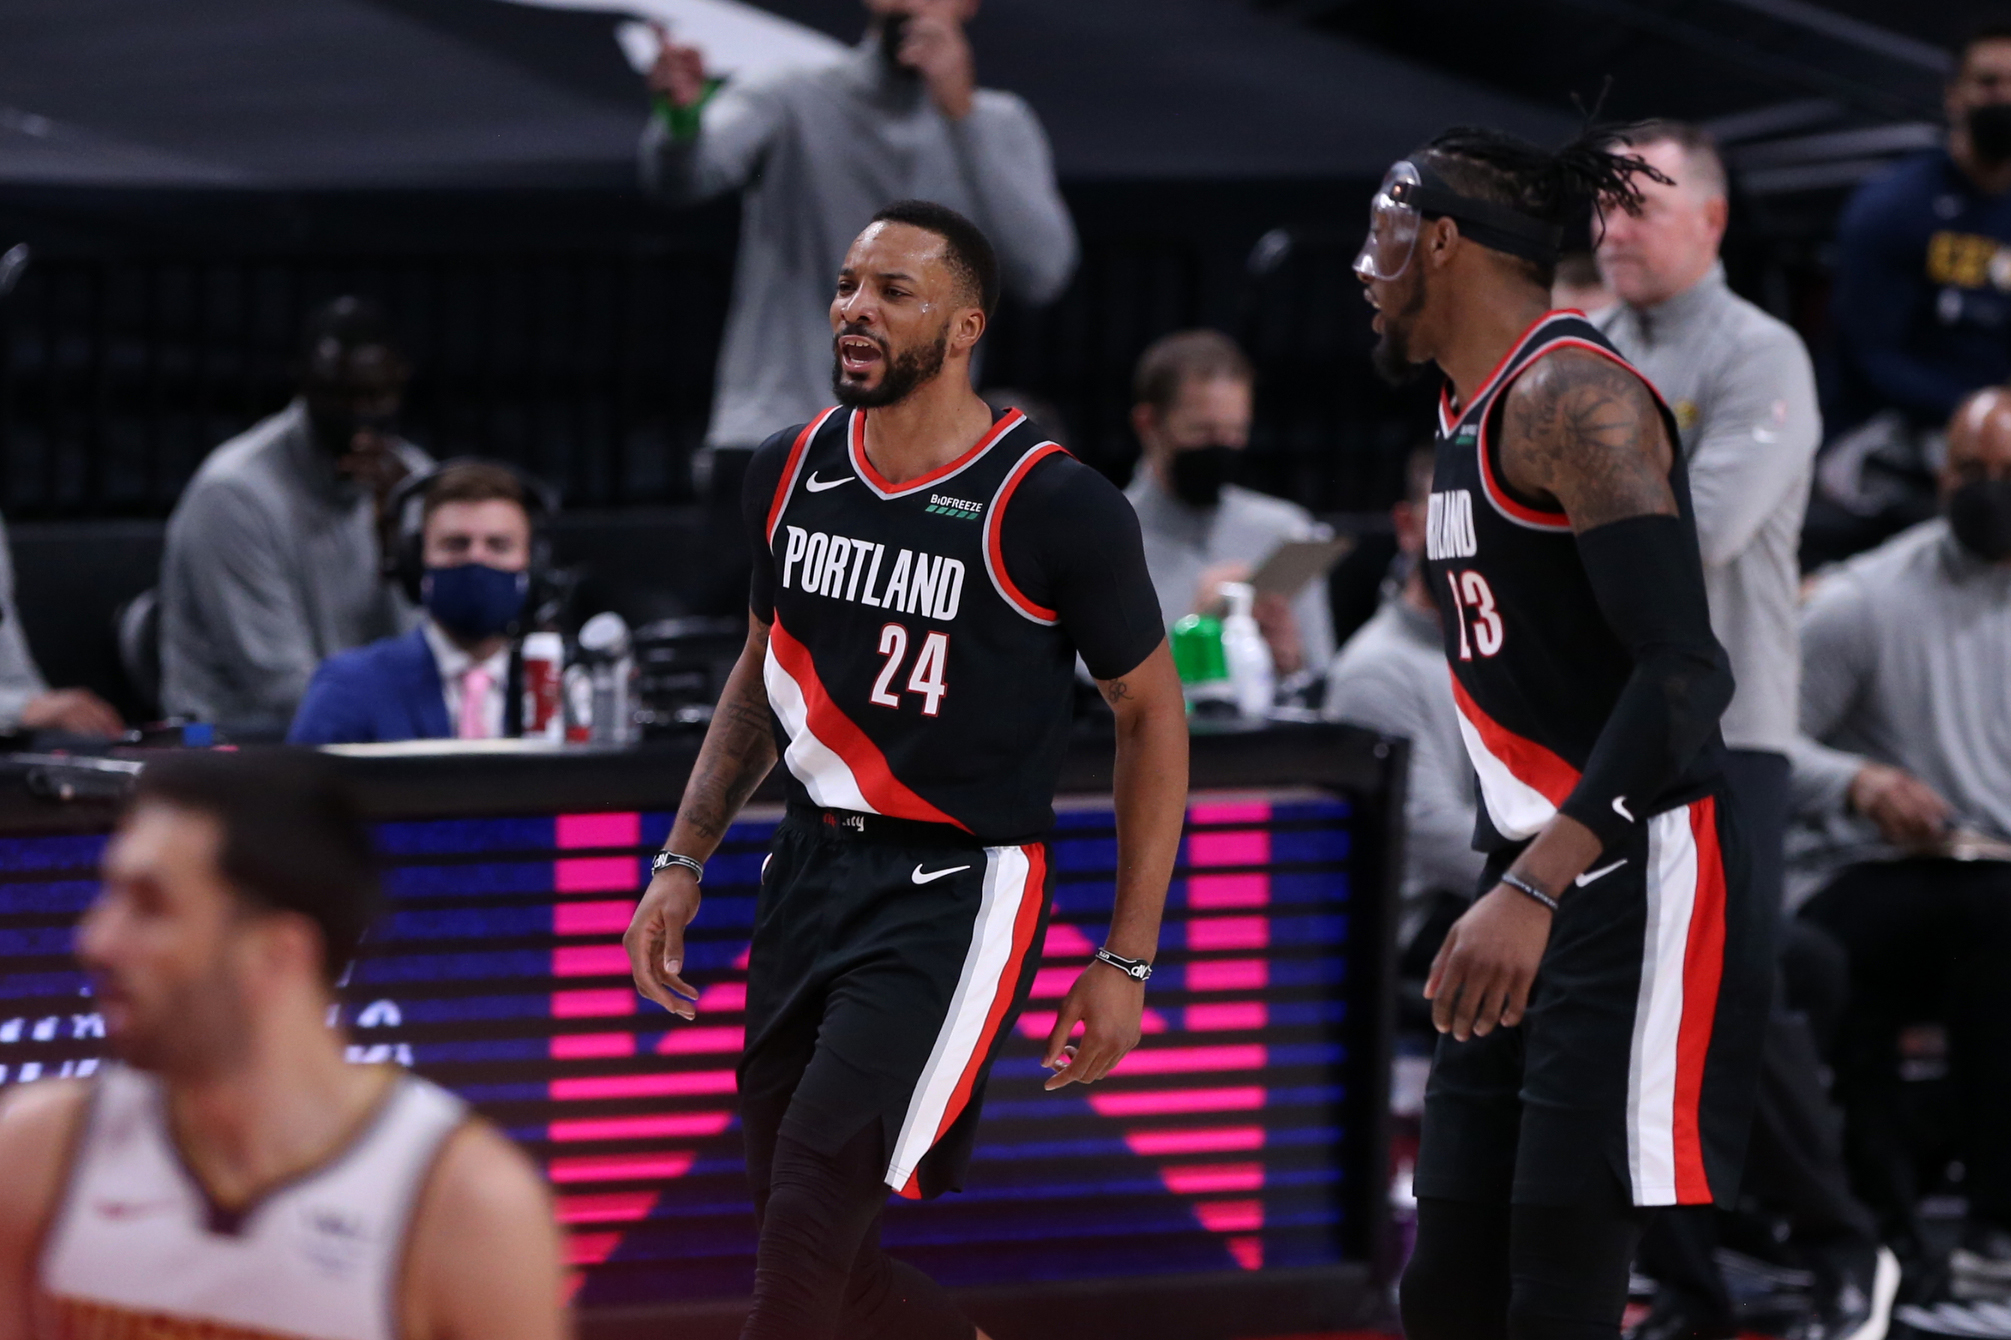 Norman Powell tells Yahoo Sports he's declining player option